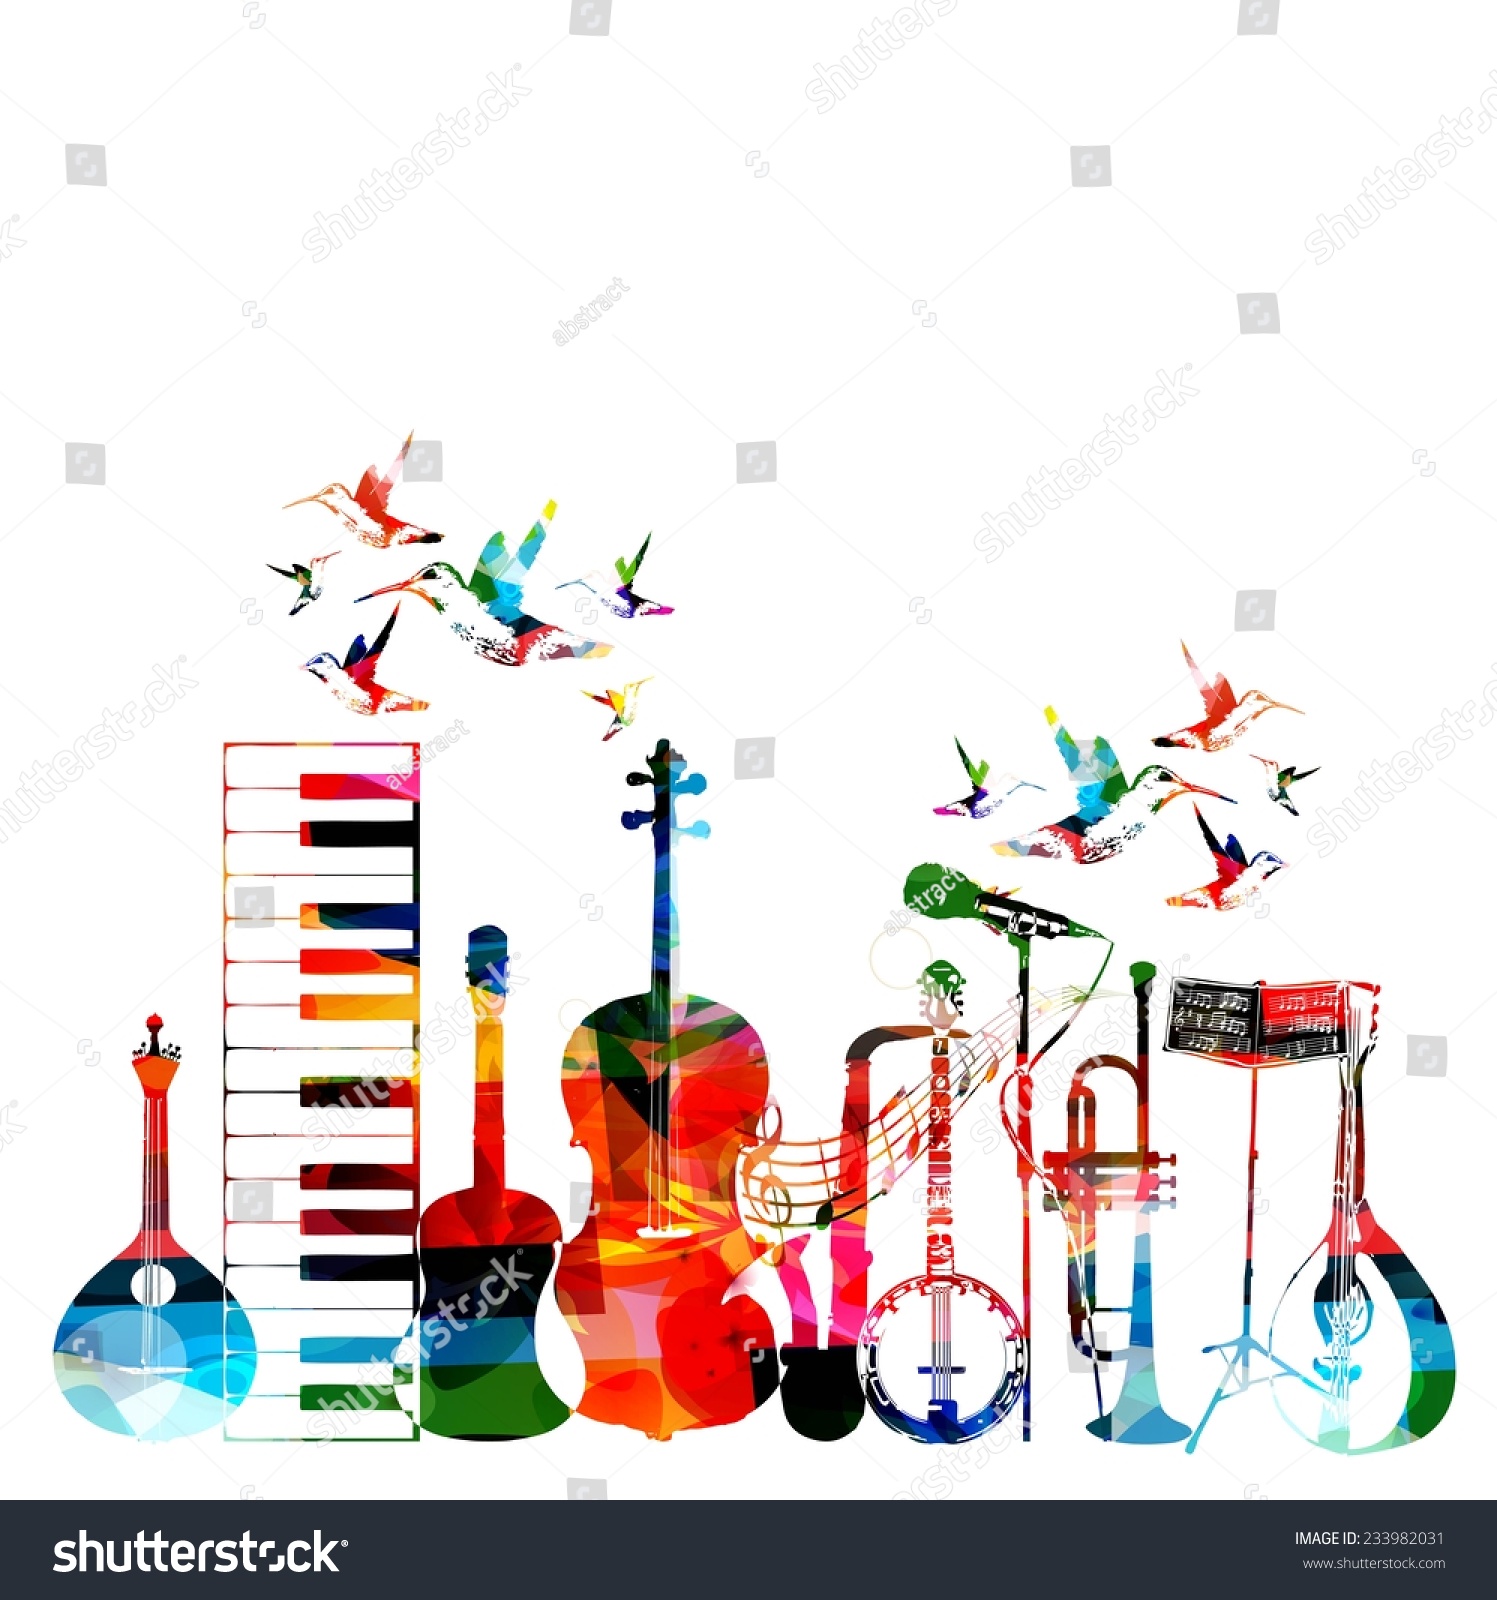 Colorful Musical Instruments Background Stock Vector